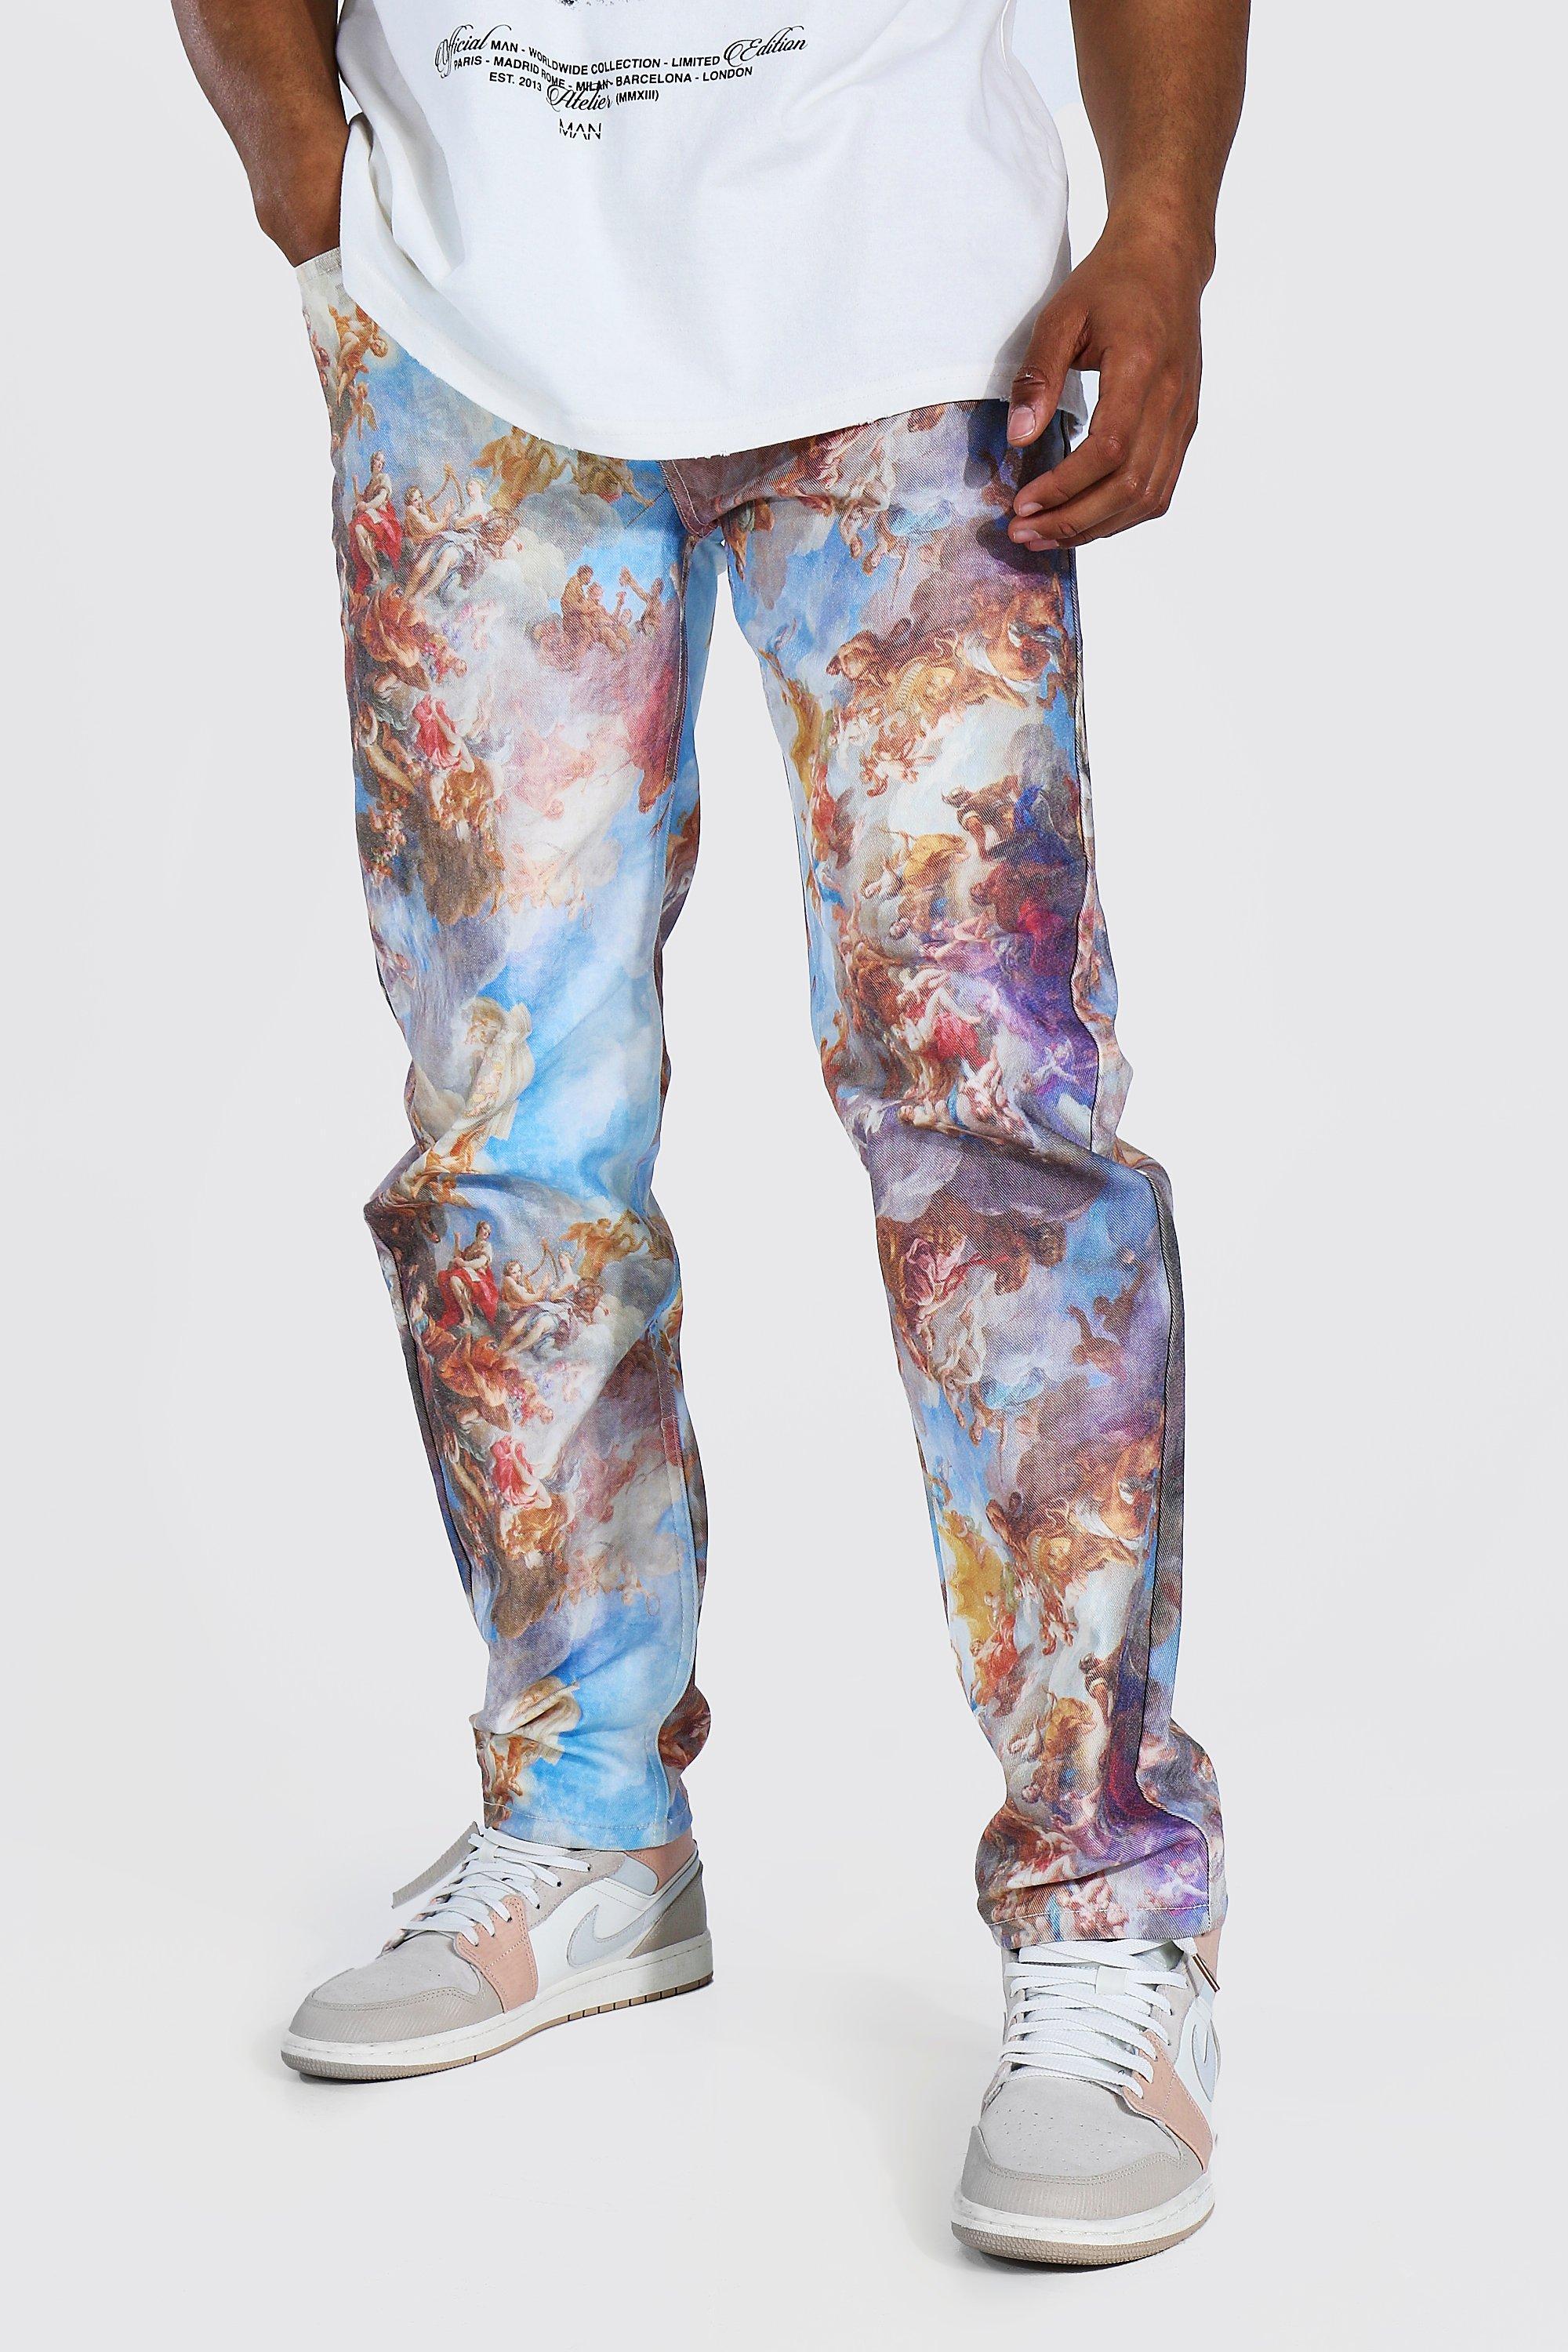 BoohooMAN Relaxed Fit Renaissance All Over Print Jeans in Blue for Men |  Lyst